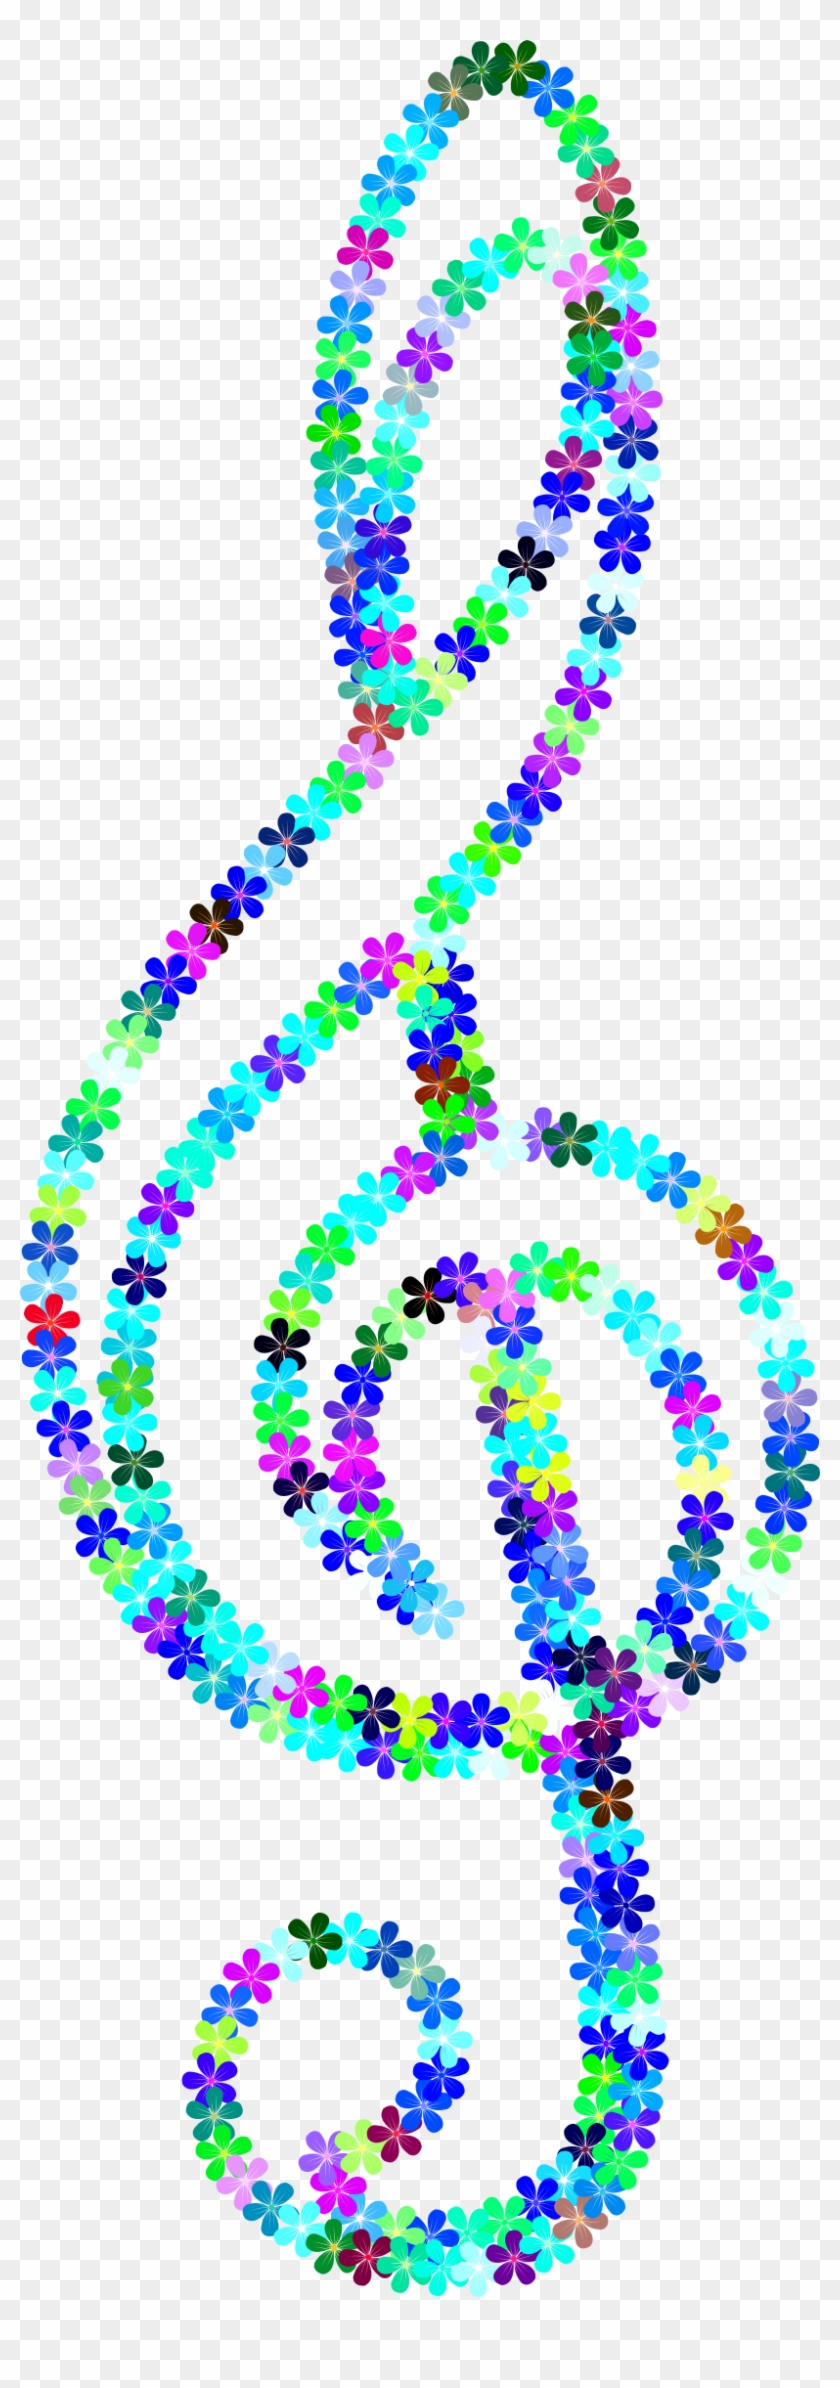 This Free Icons Png Design Of Floral Clef Outline - Circle Clipart #2968657